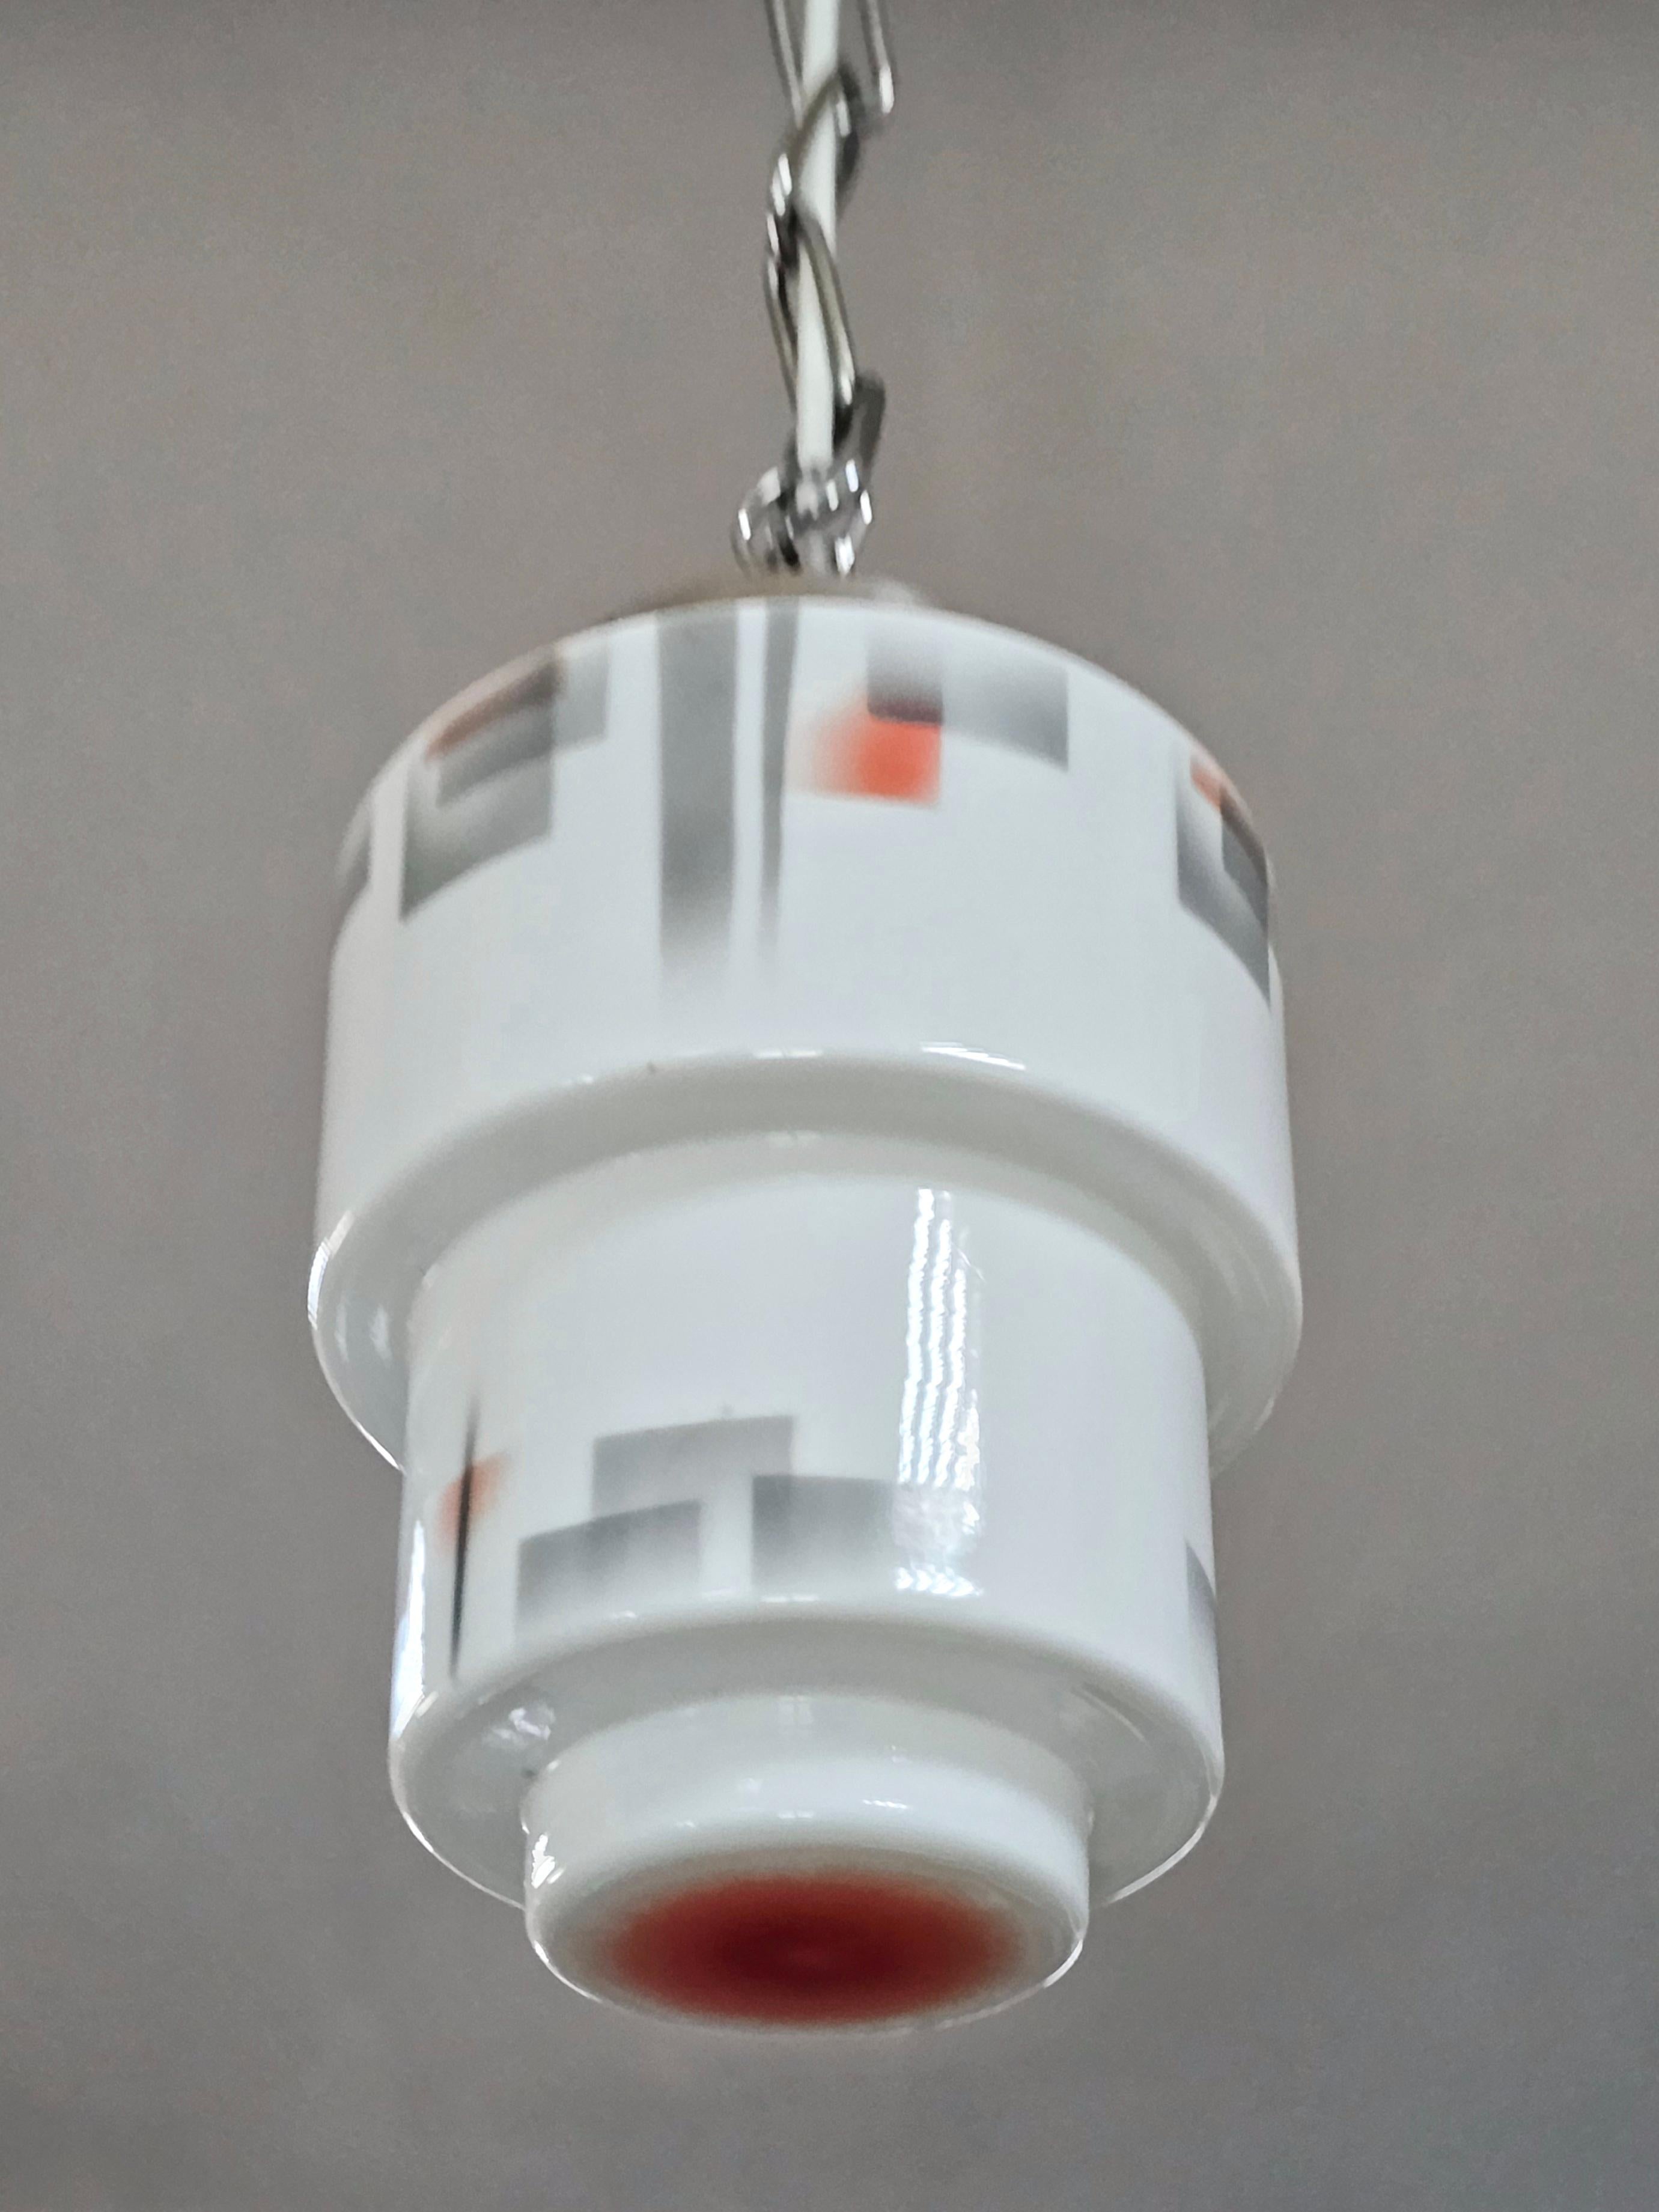 In this listing you will find a beautiful, small Stepped Skyscraper Art Deco pendant light. The glass shade is done in white opaline glass, with gray and red print on it, making it a perfect combination of colors. Perfect choice for the small